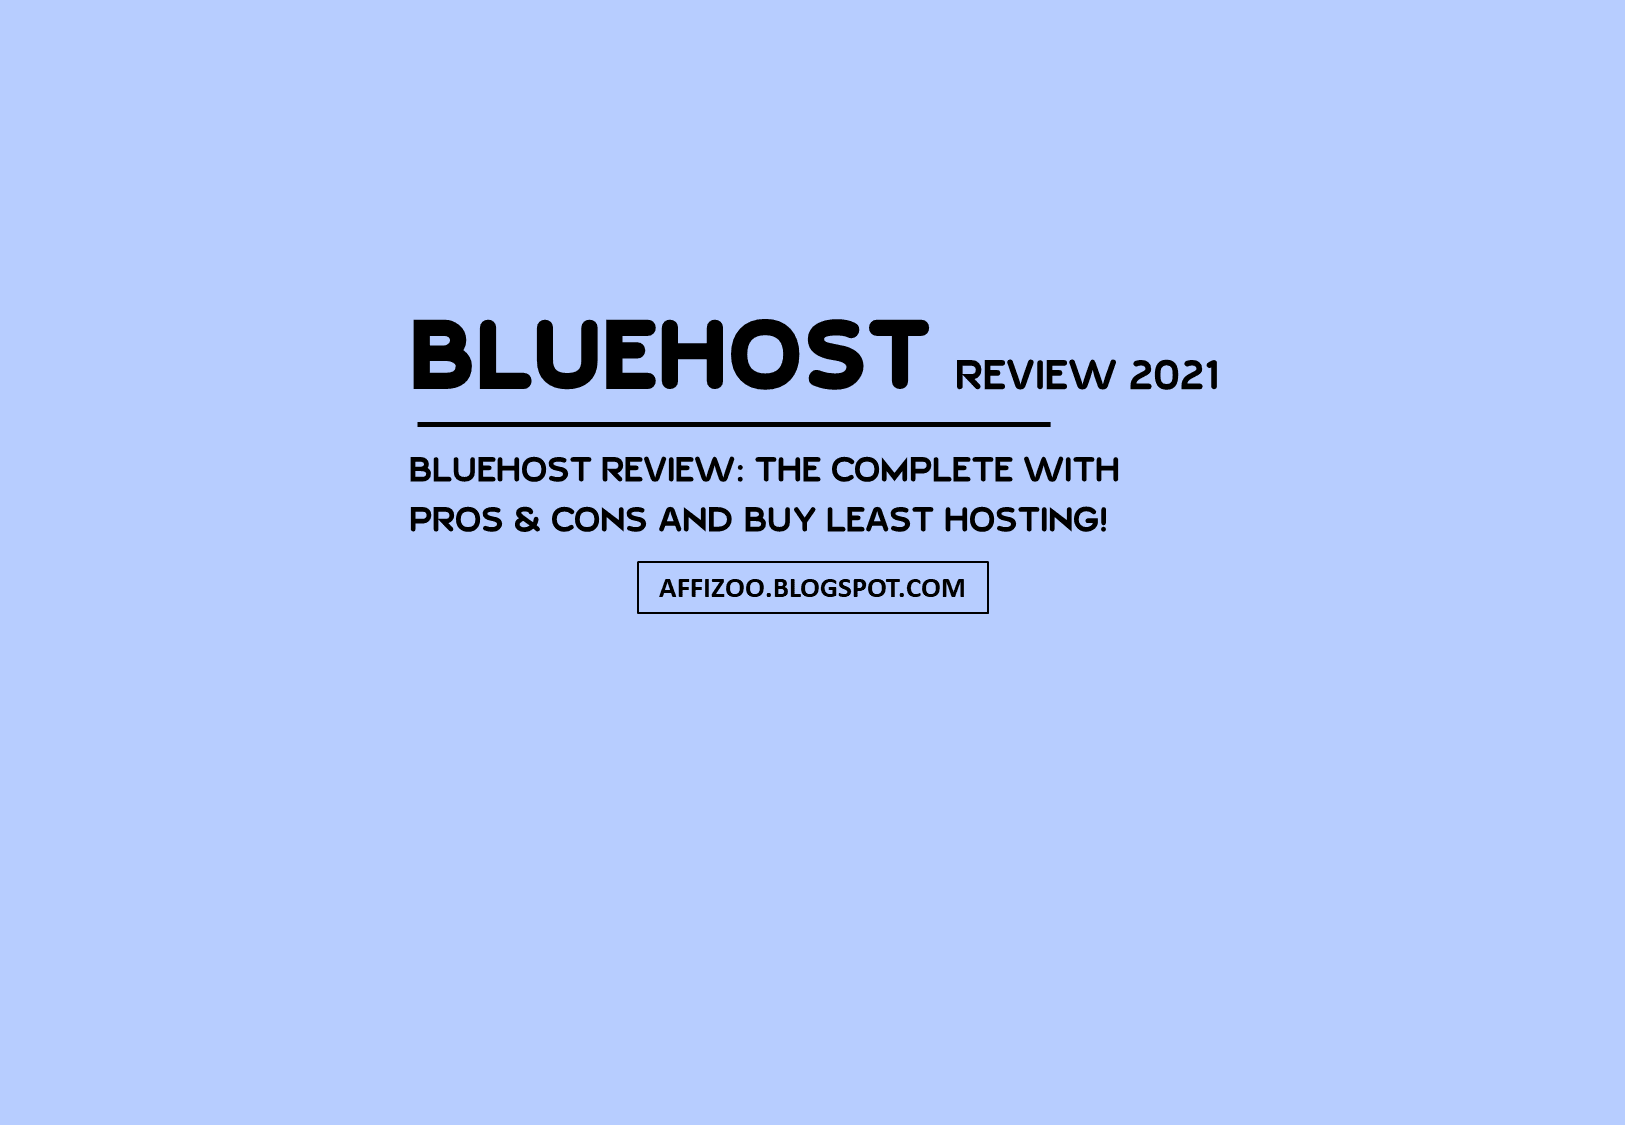 BlueHost Review 2021: What's New In BlueHost? The Complete Overview With Pros & Cons